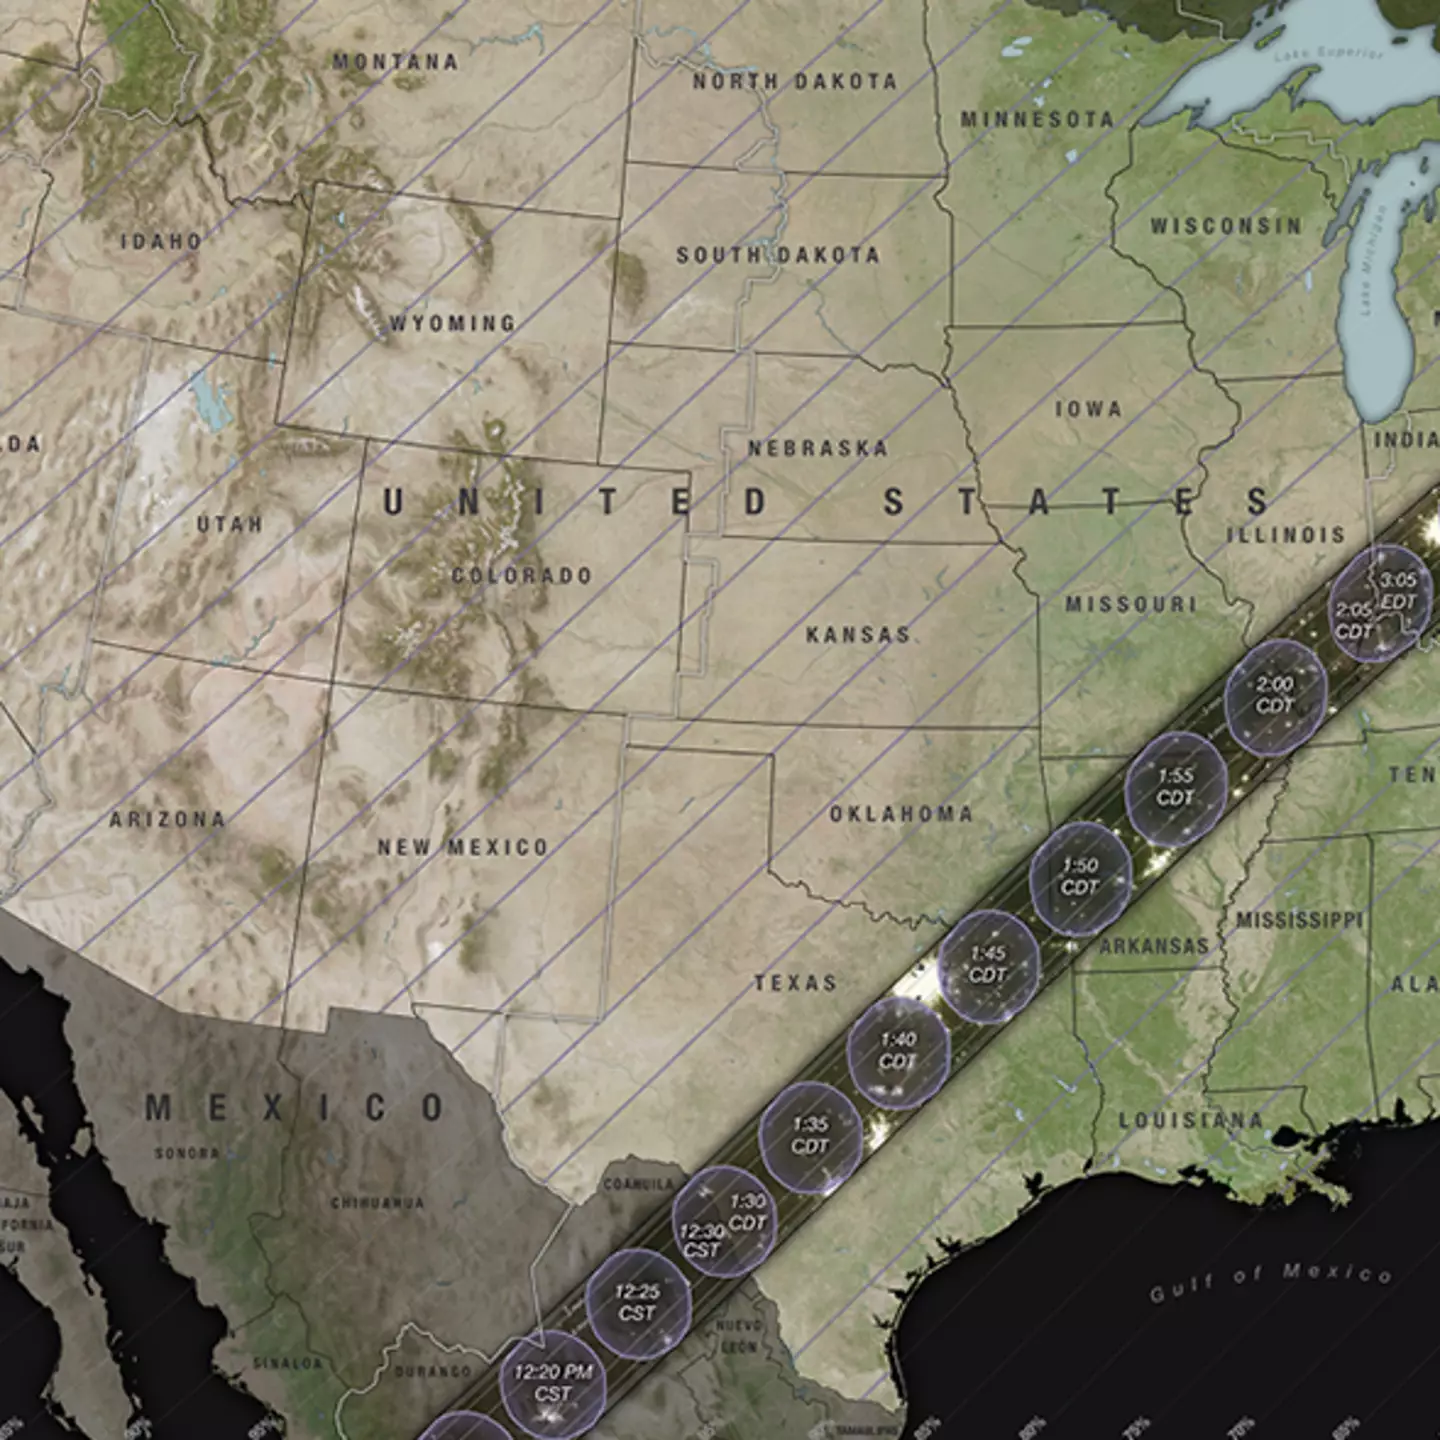 Calculator reveals best places to be to watch upcoming solar eclipse